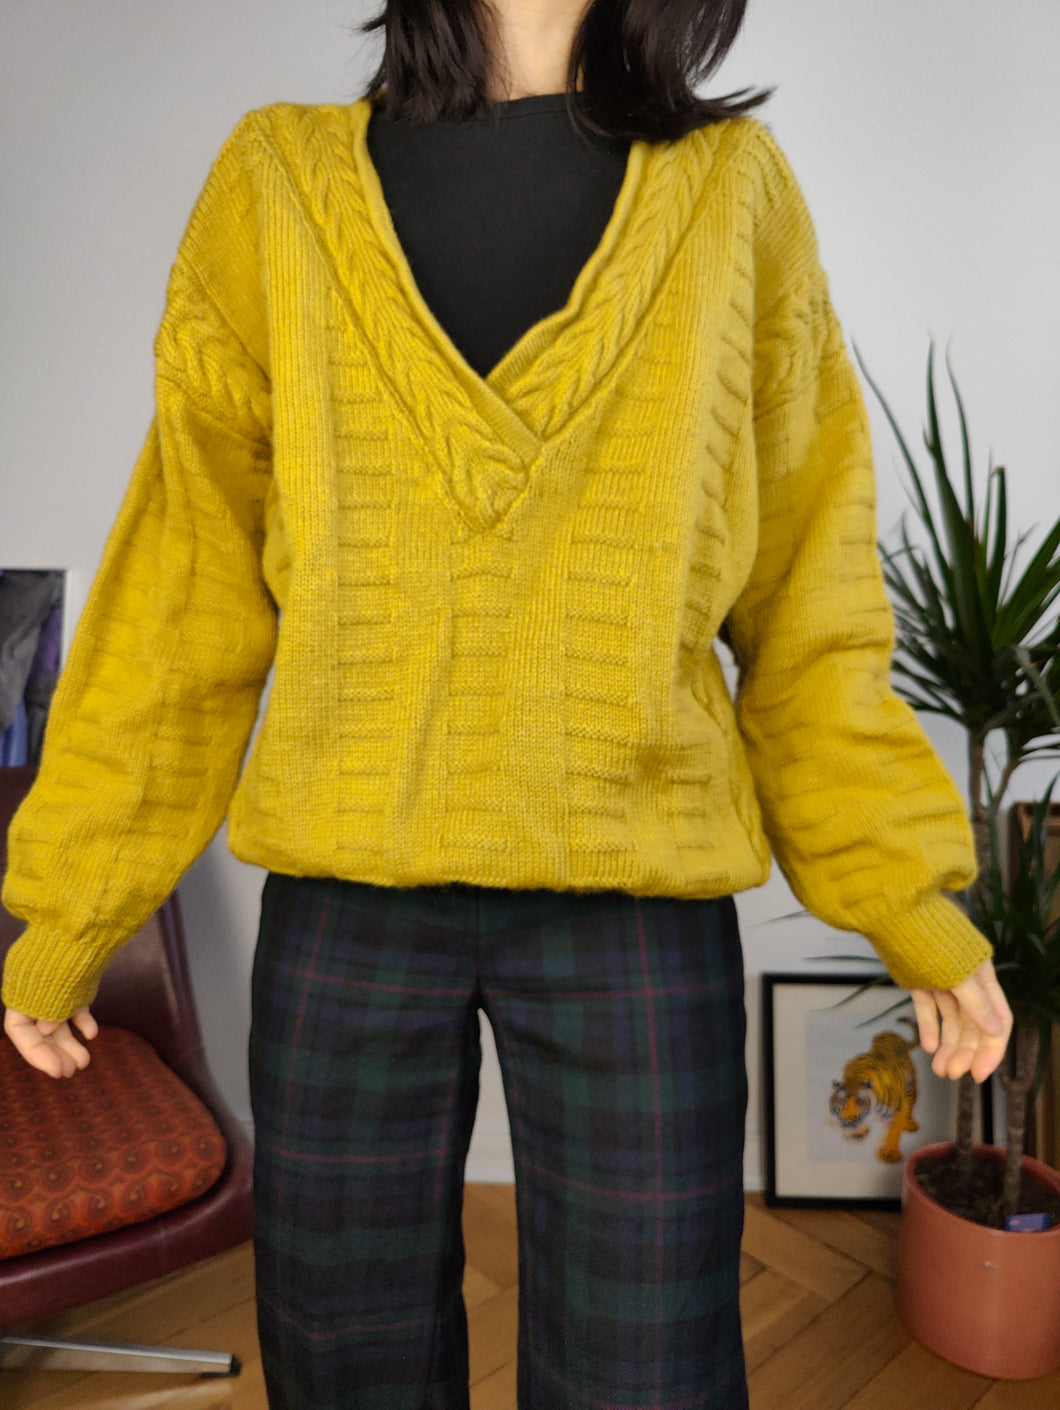 Vintage wool blend sweater cable knit mustard yellow plain fall winter knitted pullover jumper V neck M